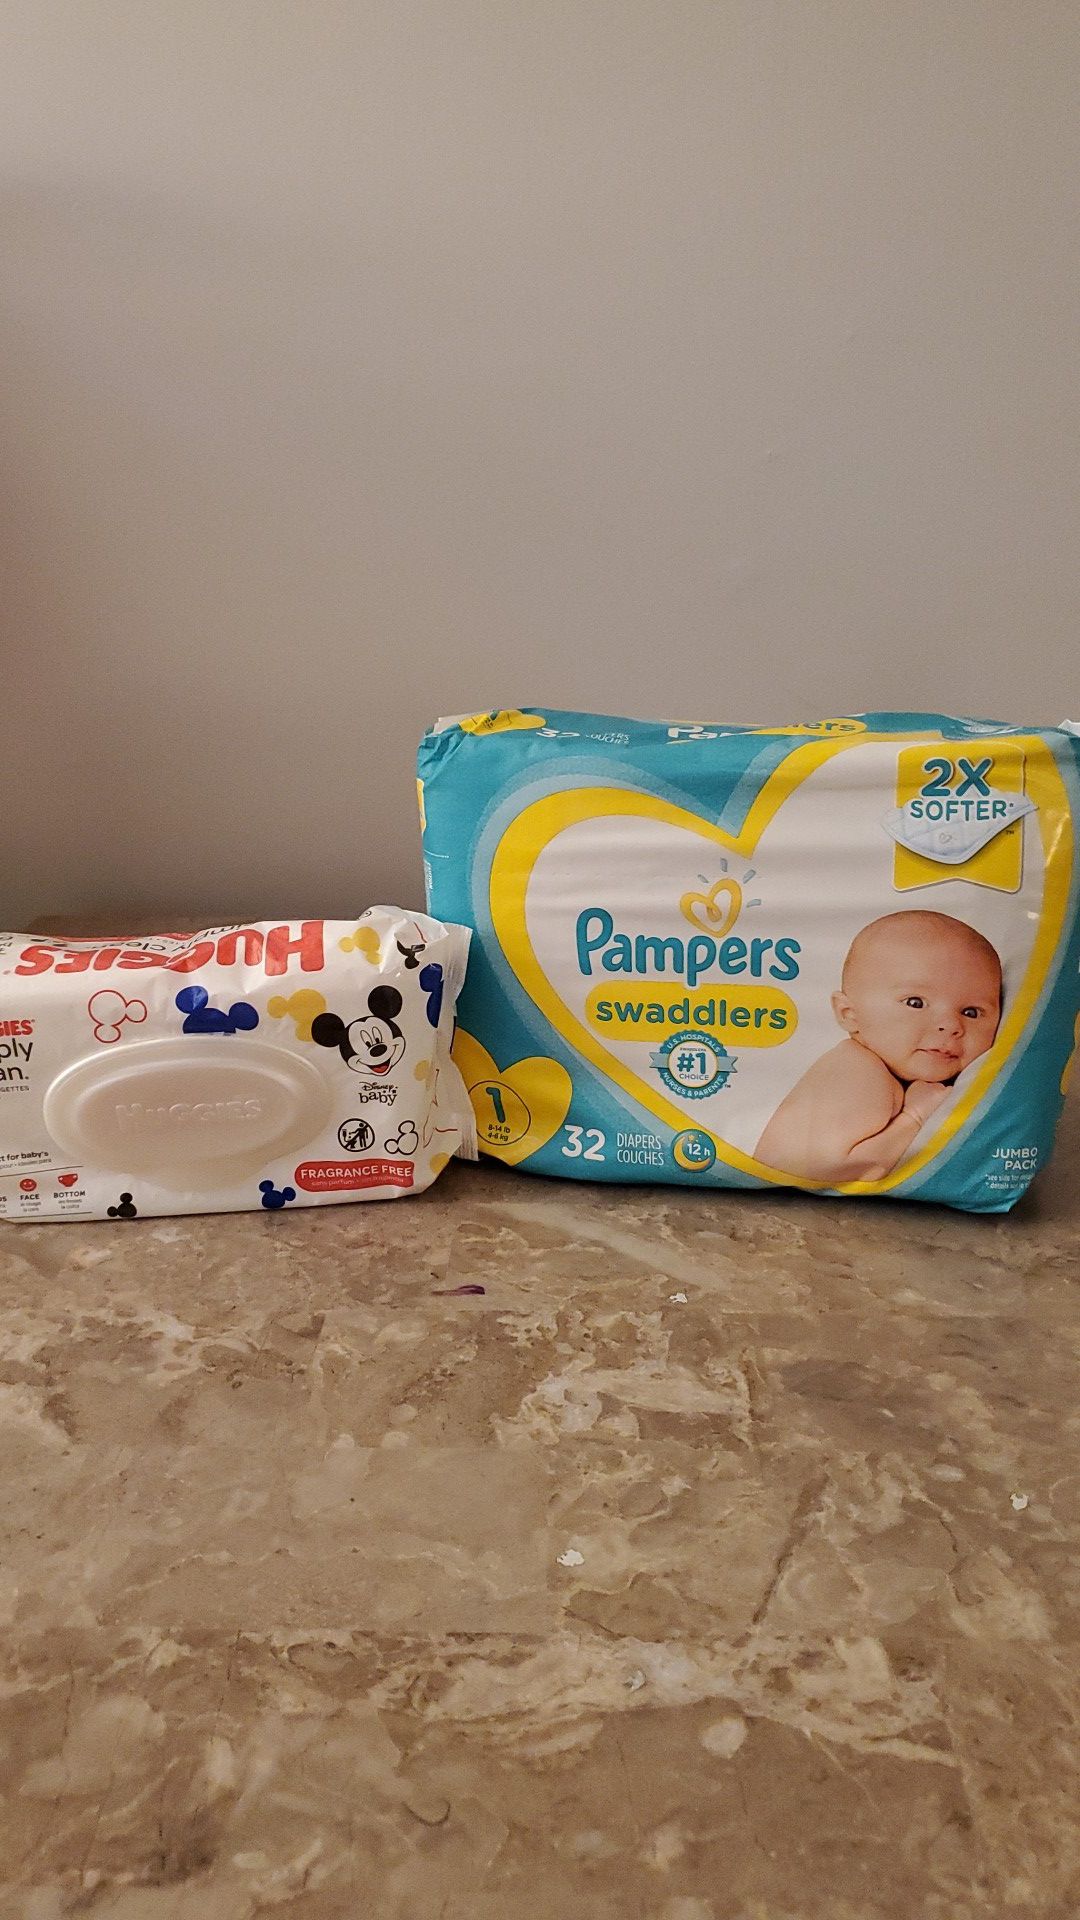 Pampers diapers & baby wipes 🛑 👀If it's listed, it's available😊